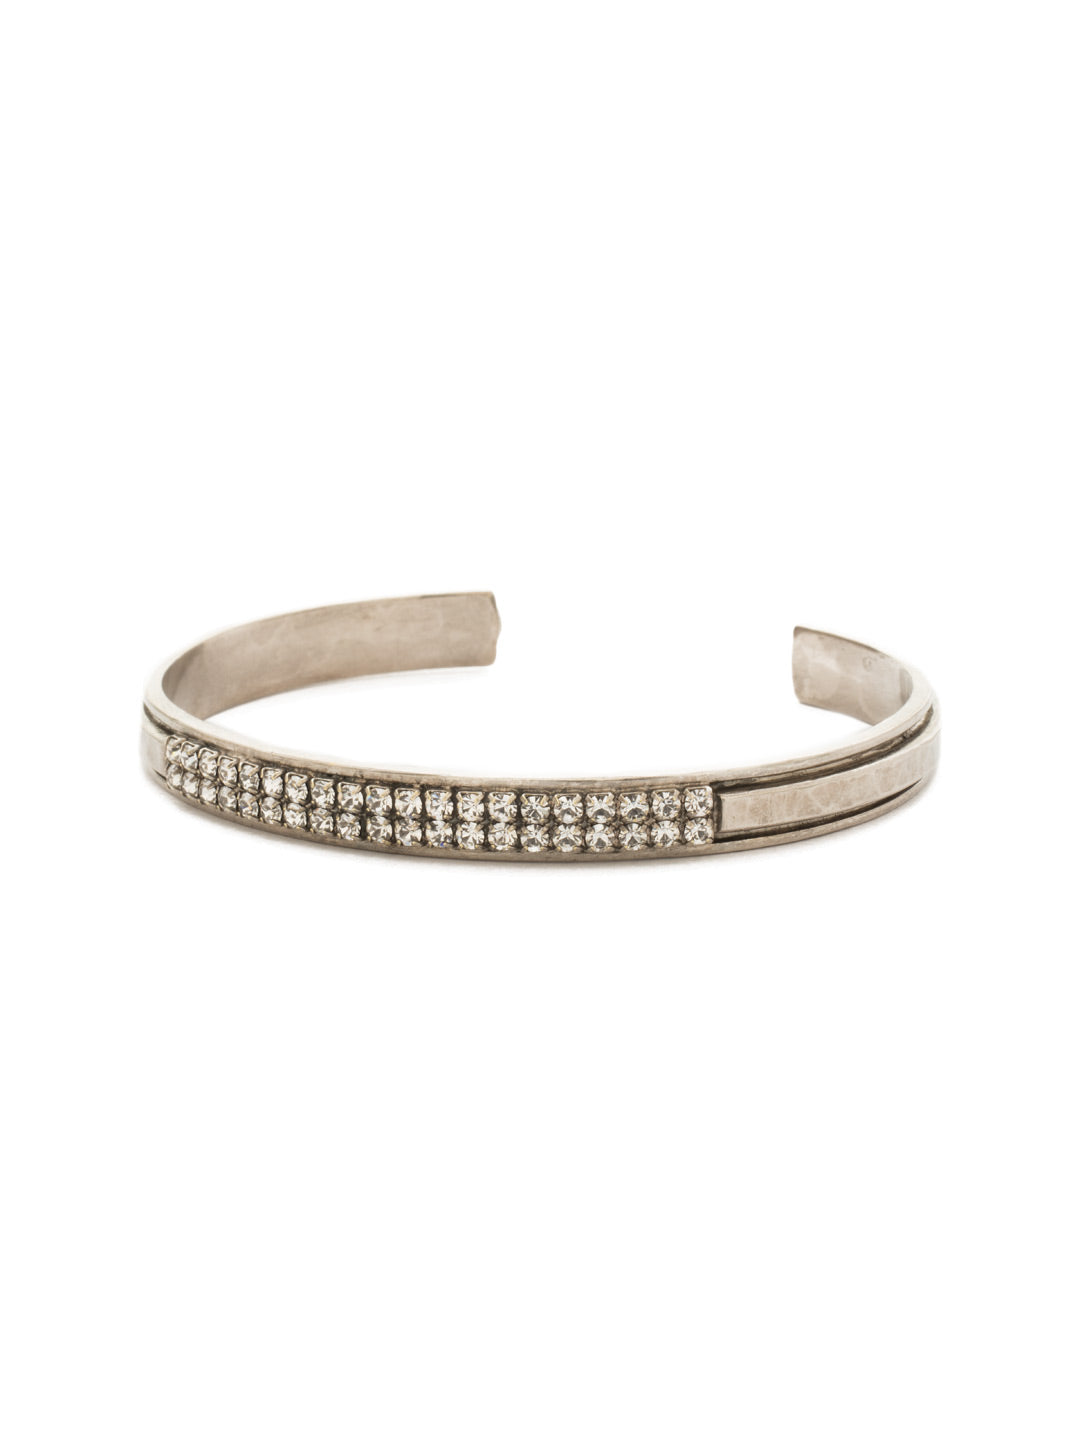 Product Image: All Lined Up Cuff Bracelet